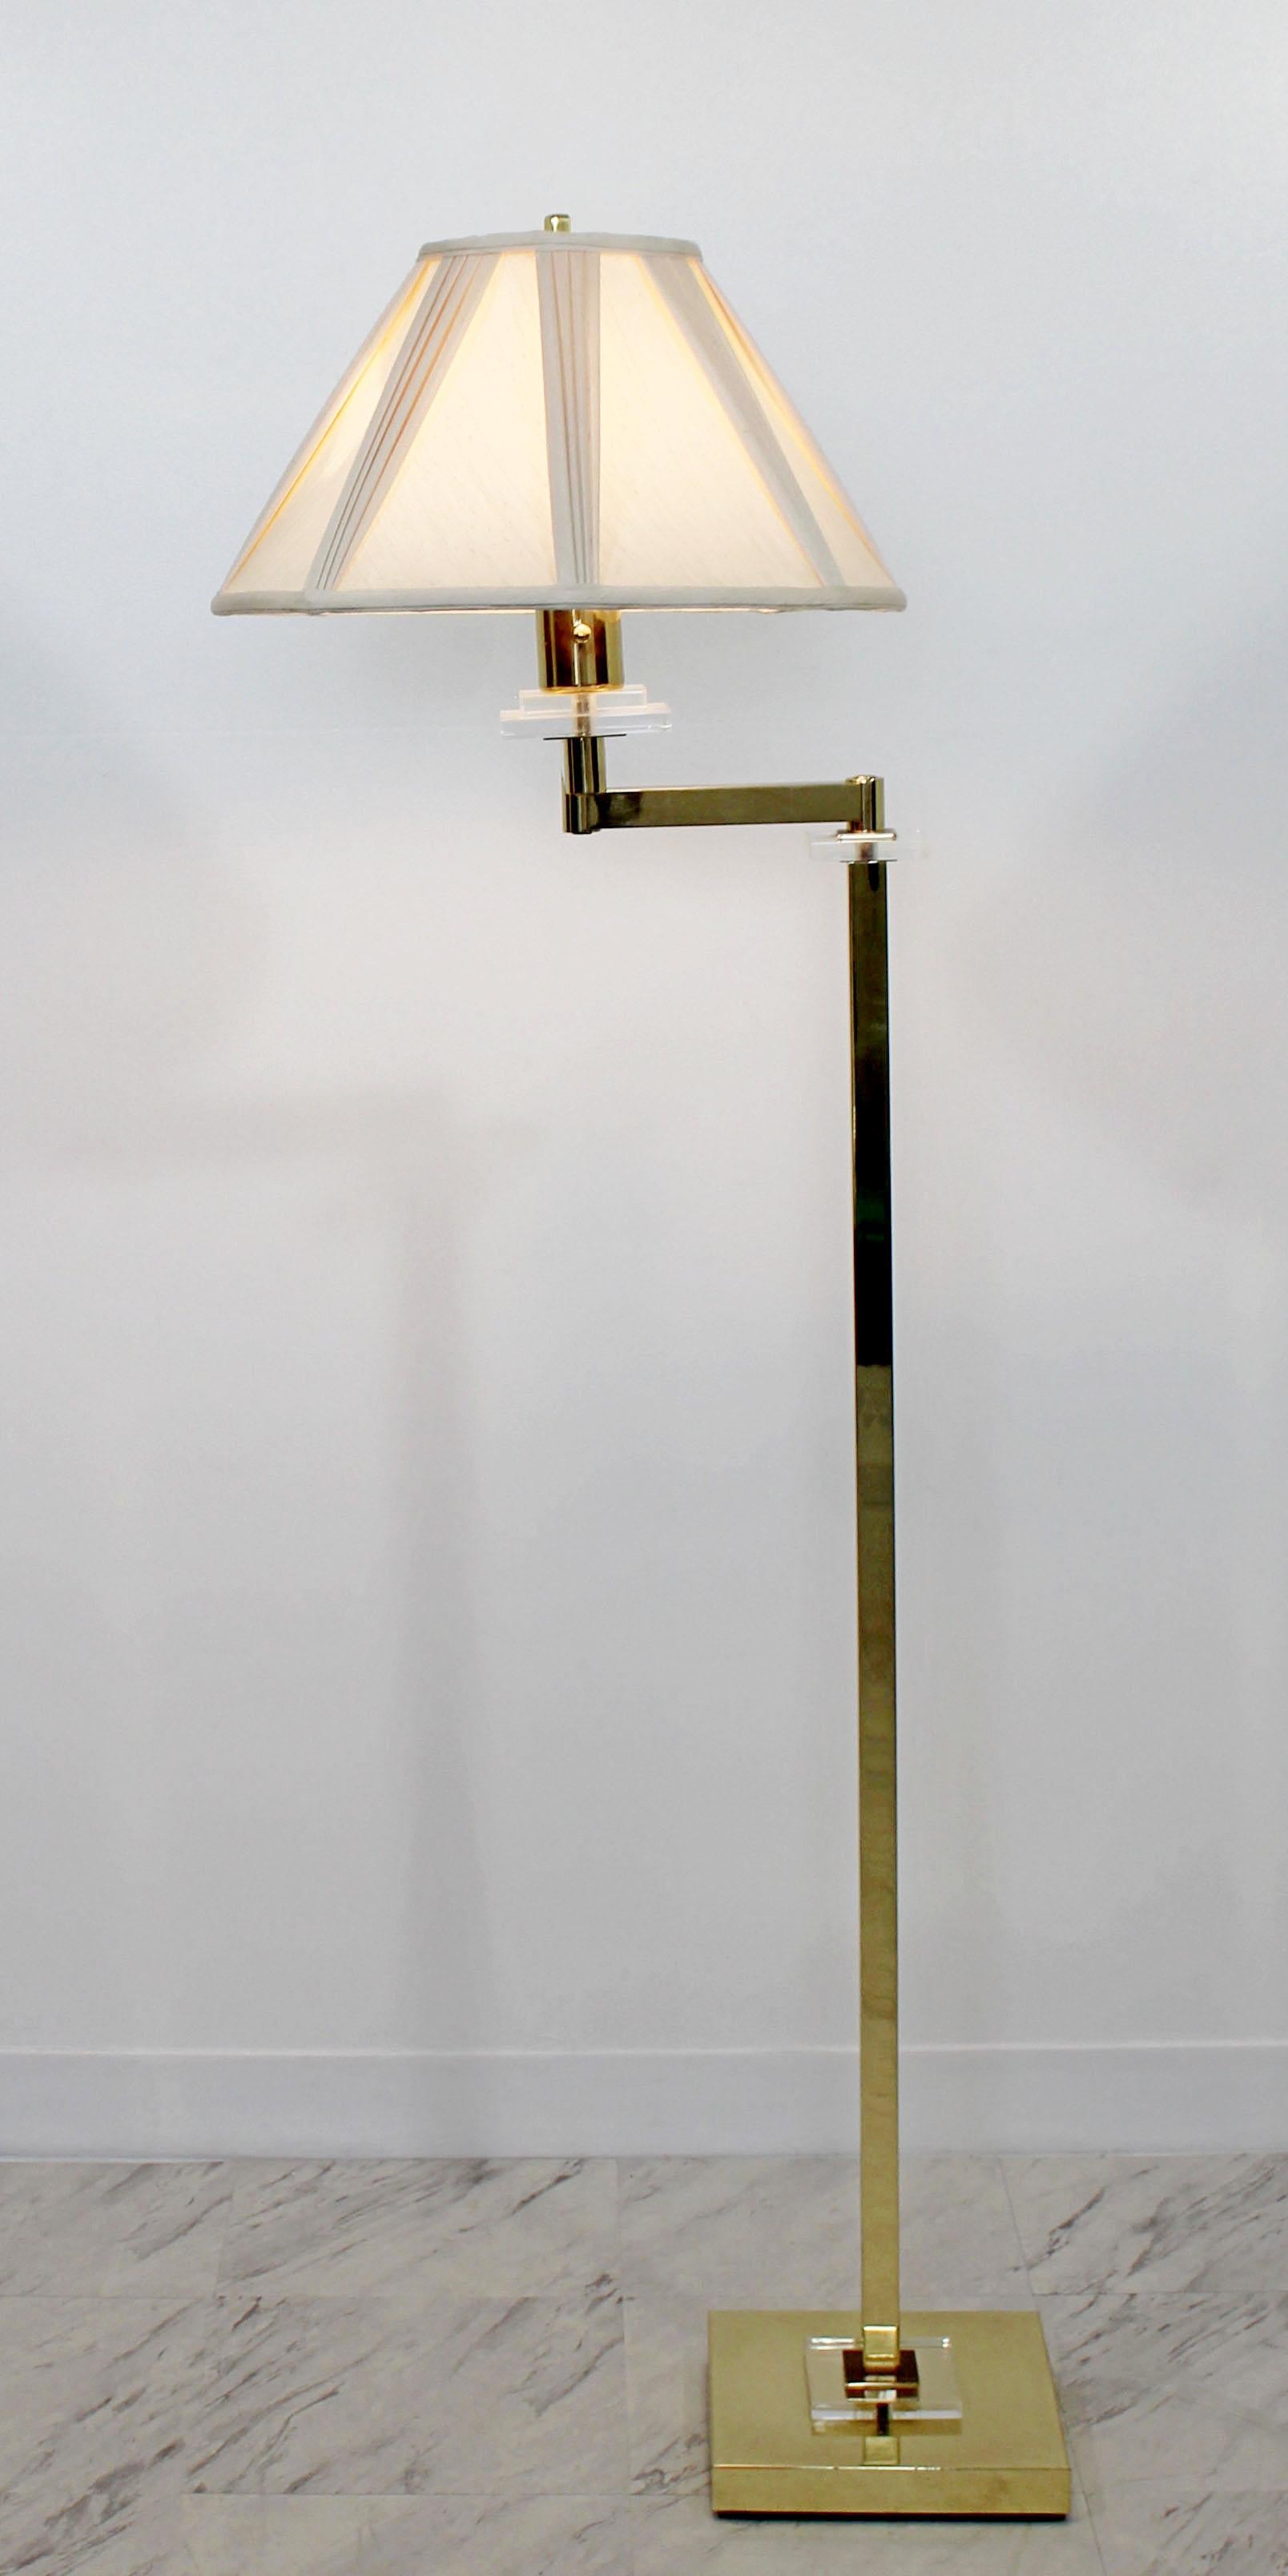 For your consideration is a wonderful, swing arm floor lamp, made of brass and with Lucite accents, with original finial, in the style of Karl Springer, circa the 1970s. In excellent condition. The dimensions of the base are 9.5